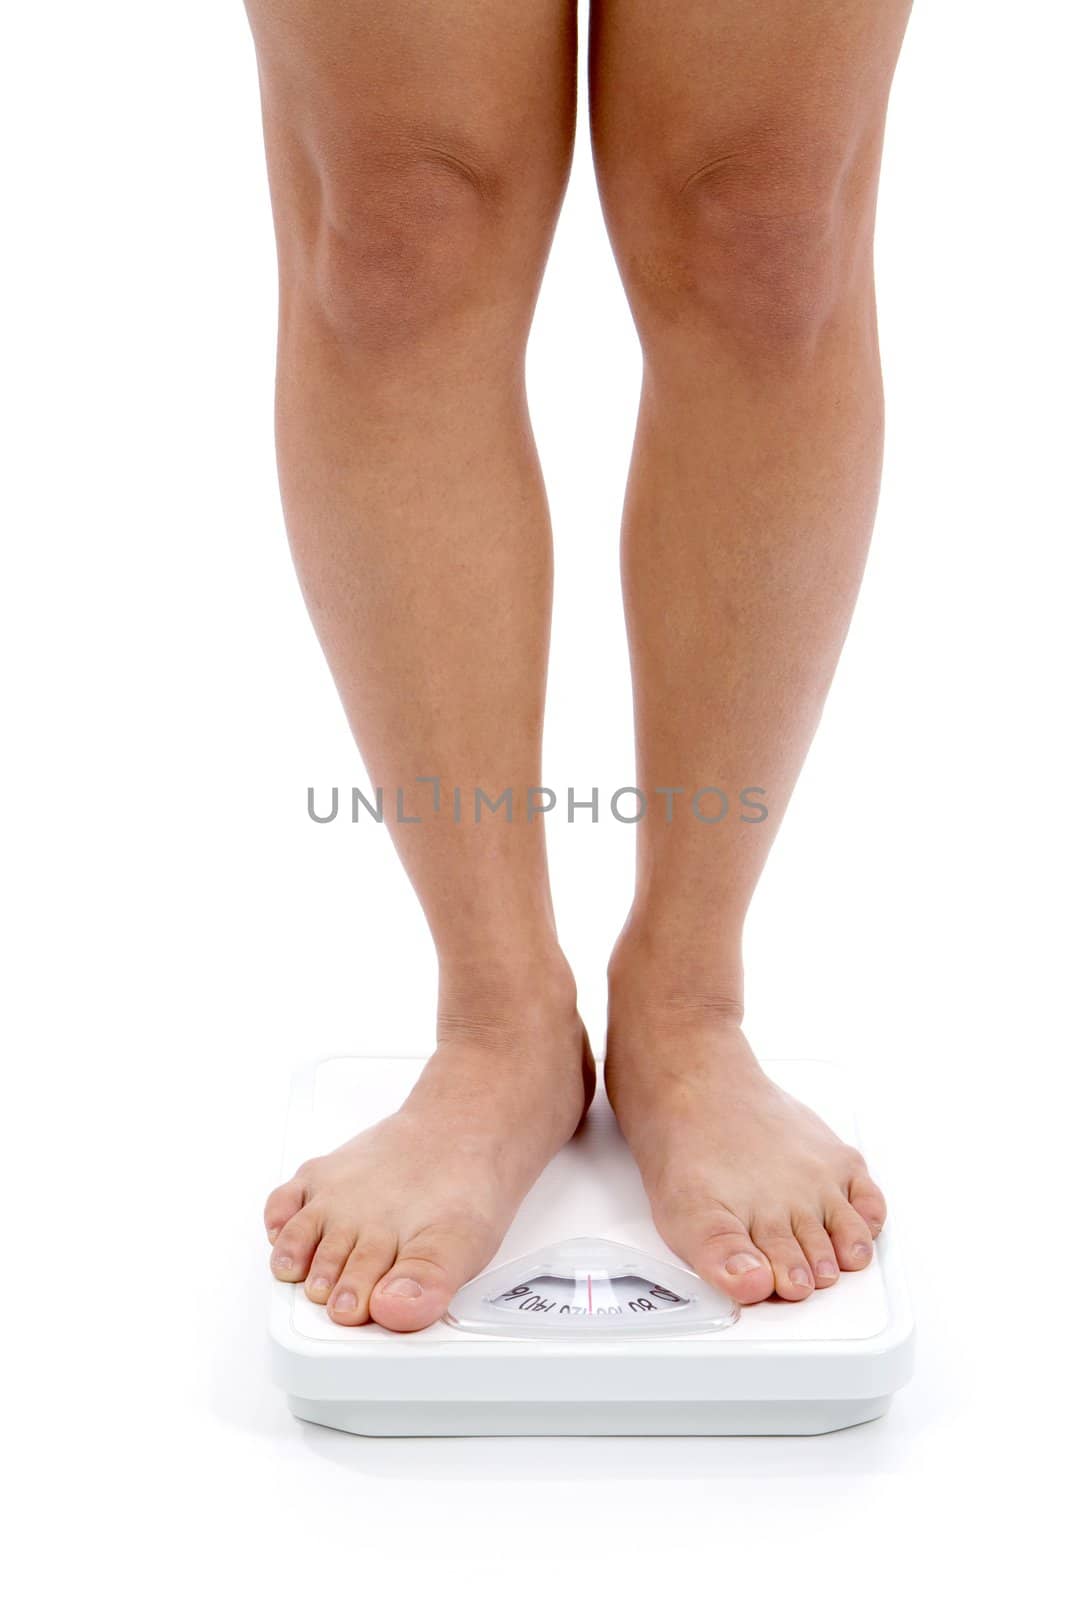 Woman's lower legs and feet shown on a bathroom scale for weightloss concept.